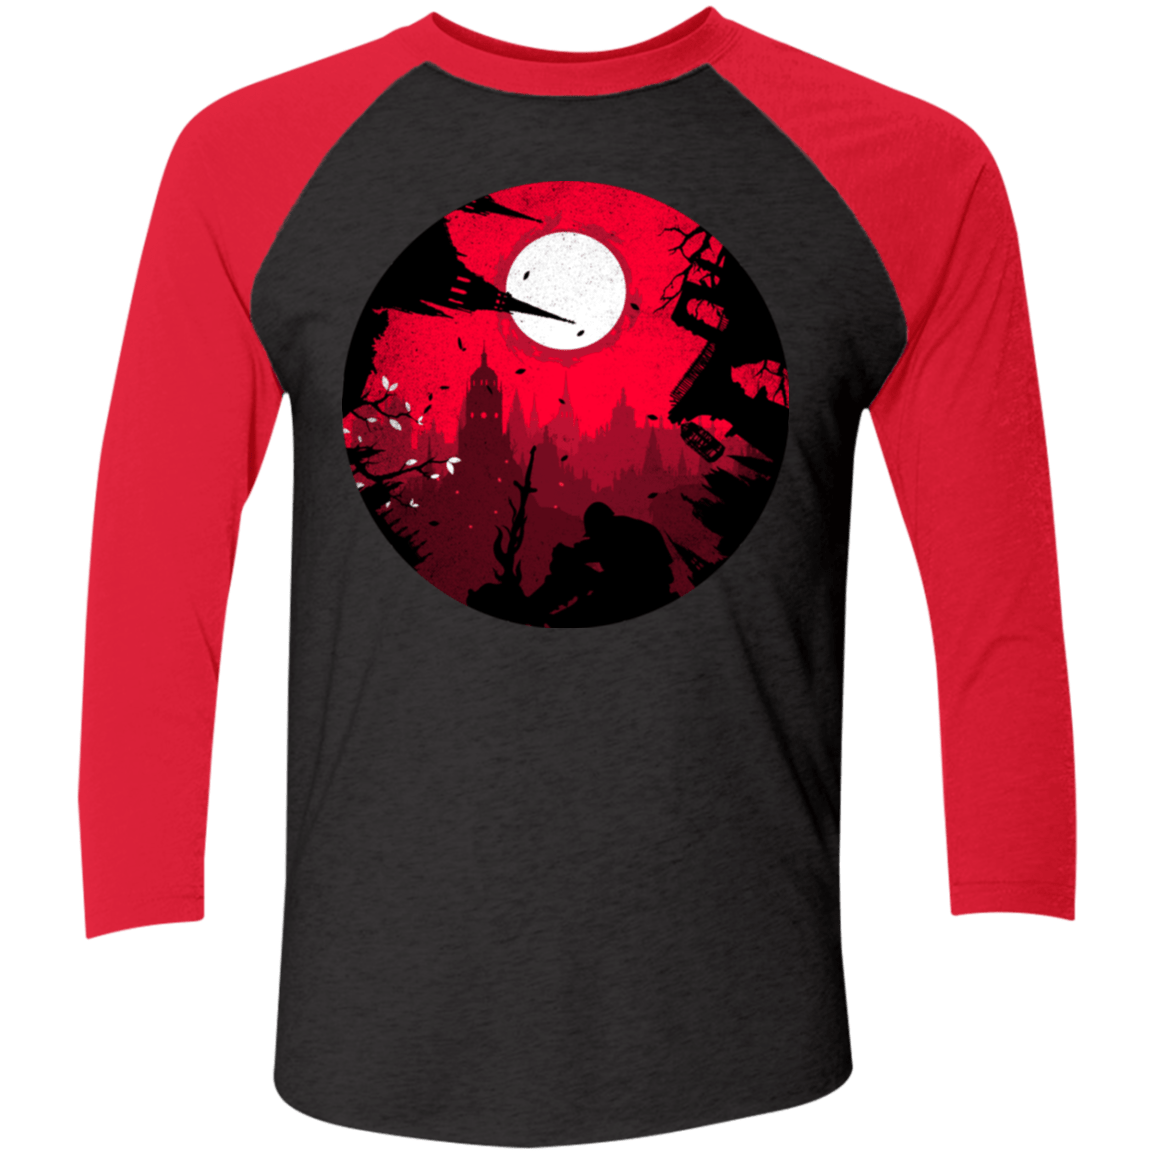 T-Shirts Vintage Black/Vintage Red / X-Small Embrace the Darkness Men's Triblend 3/4 Sleeve